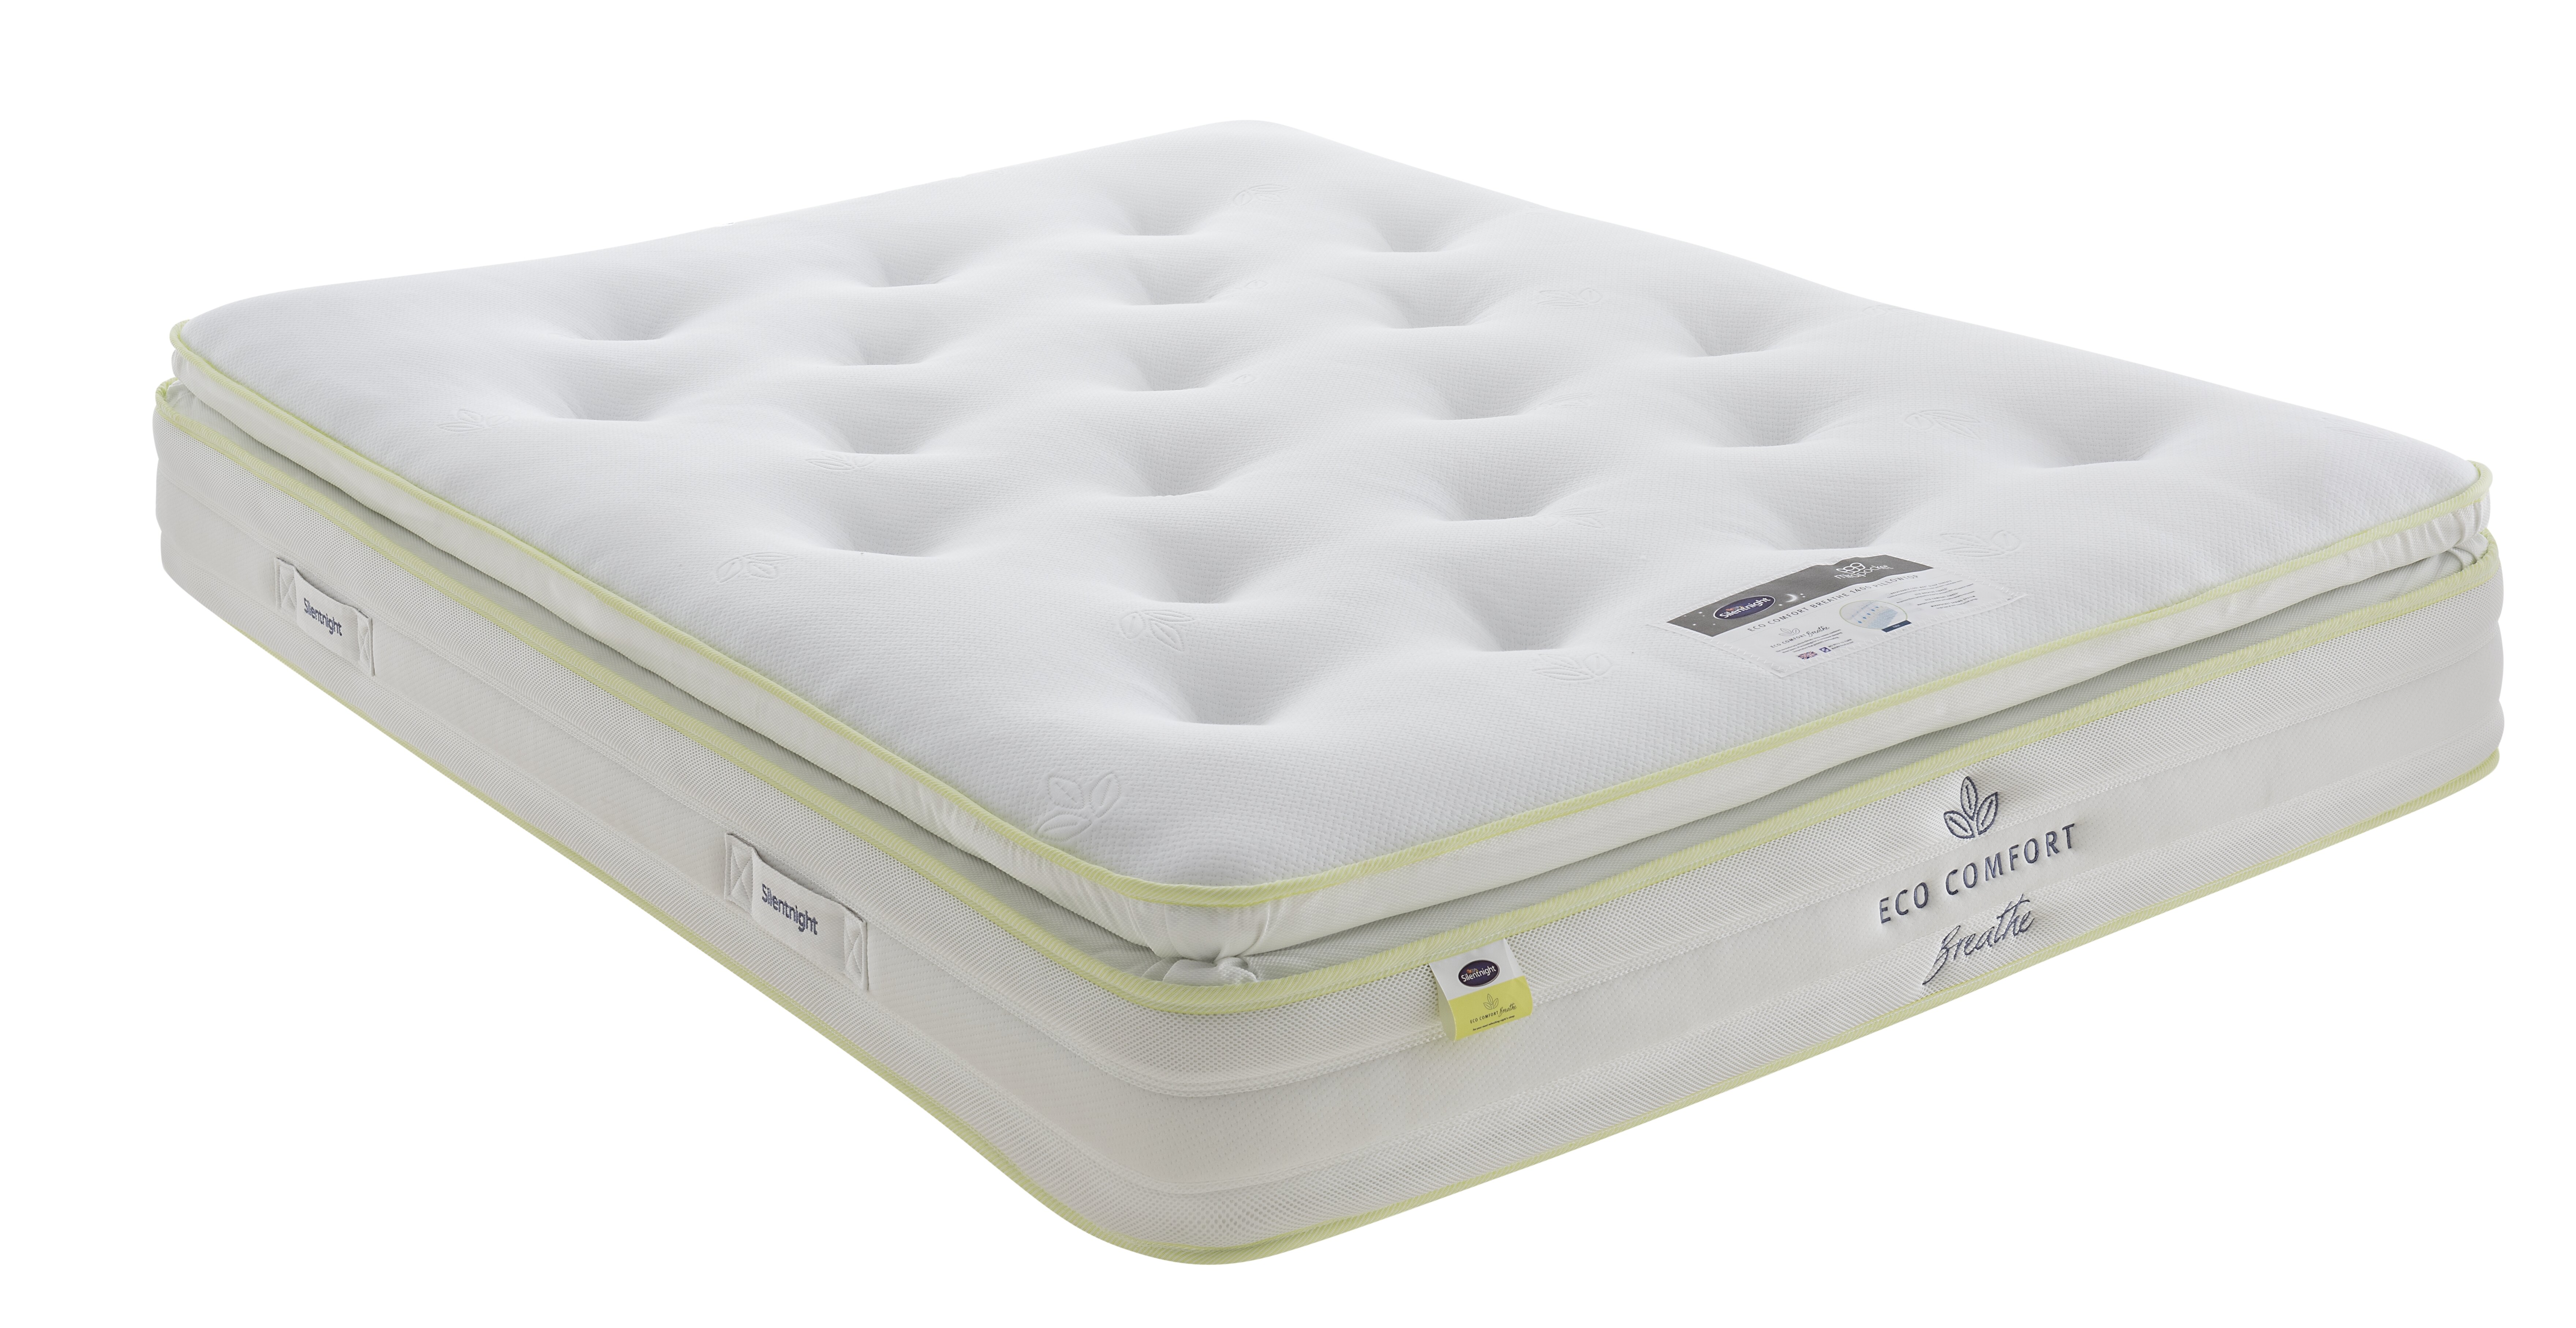 Silentnight Pillowtop Mattress King Quilted Cover Zoned Spring System Medium Firm Eco Comfort Cushioning